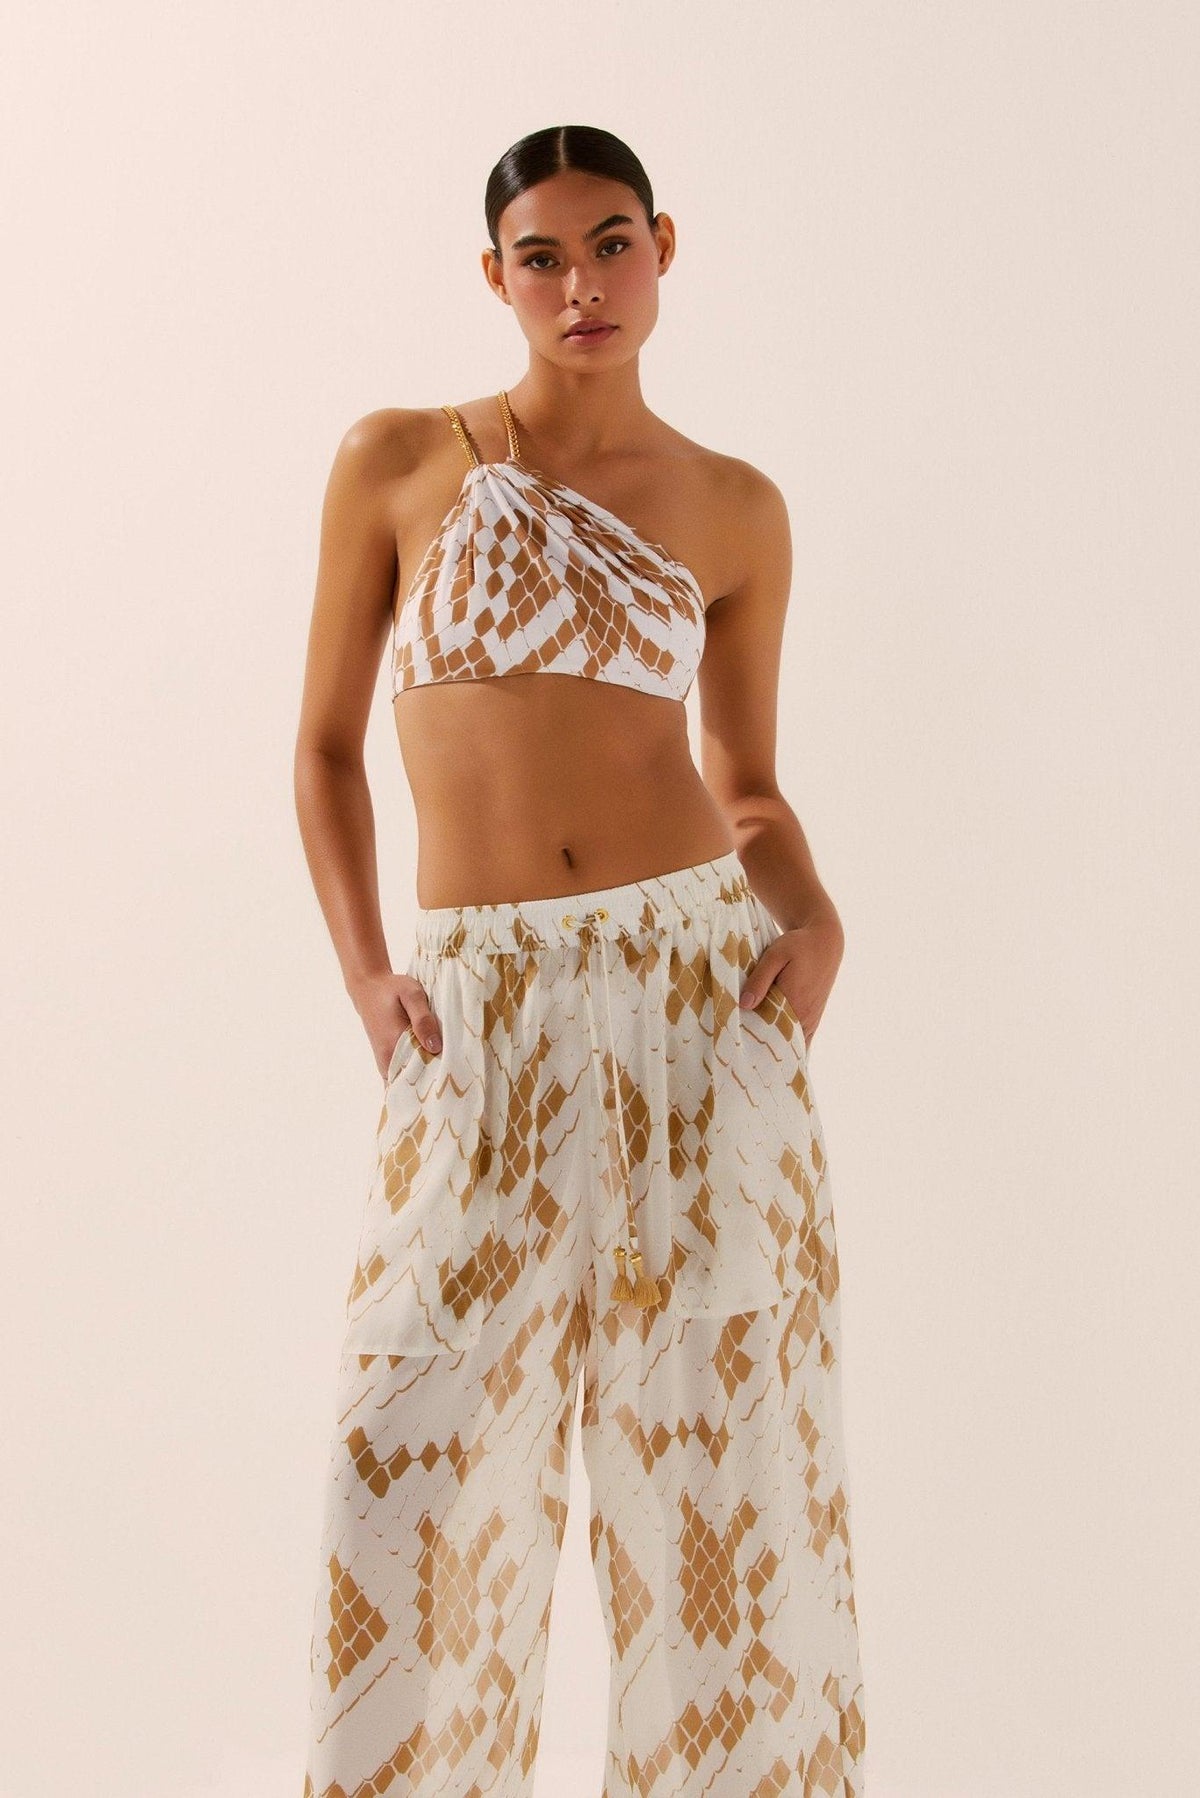 Pixiled Snake Palazzo Pants - Spring in Summer